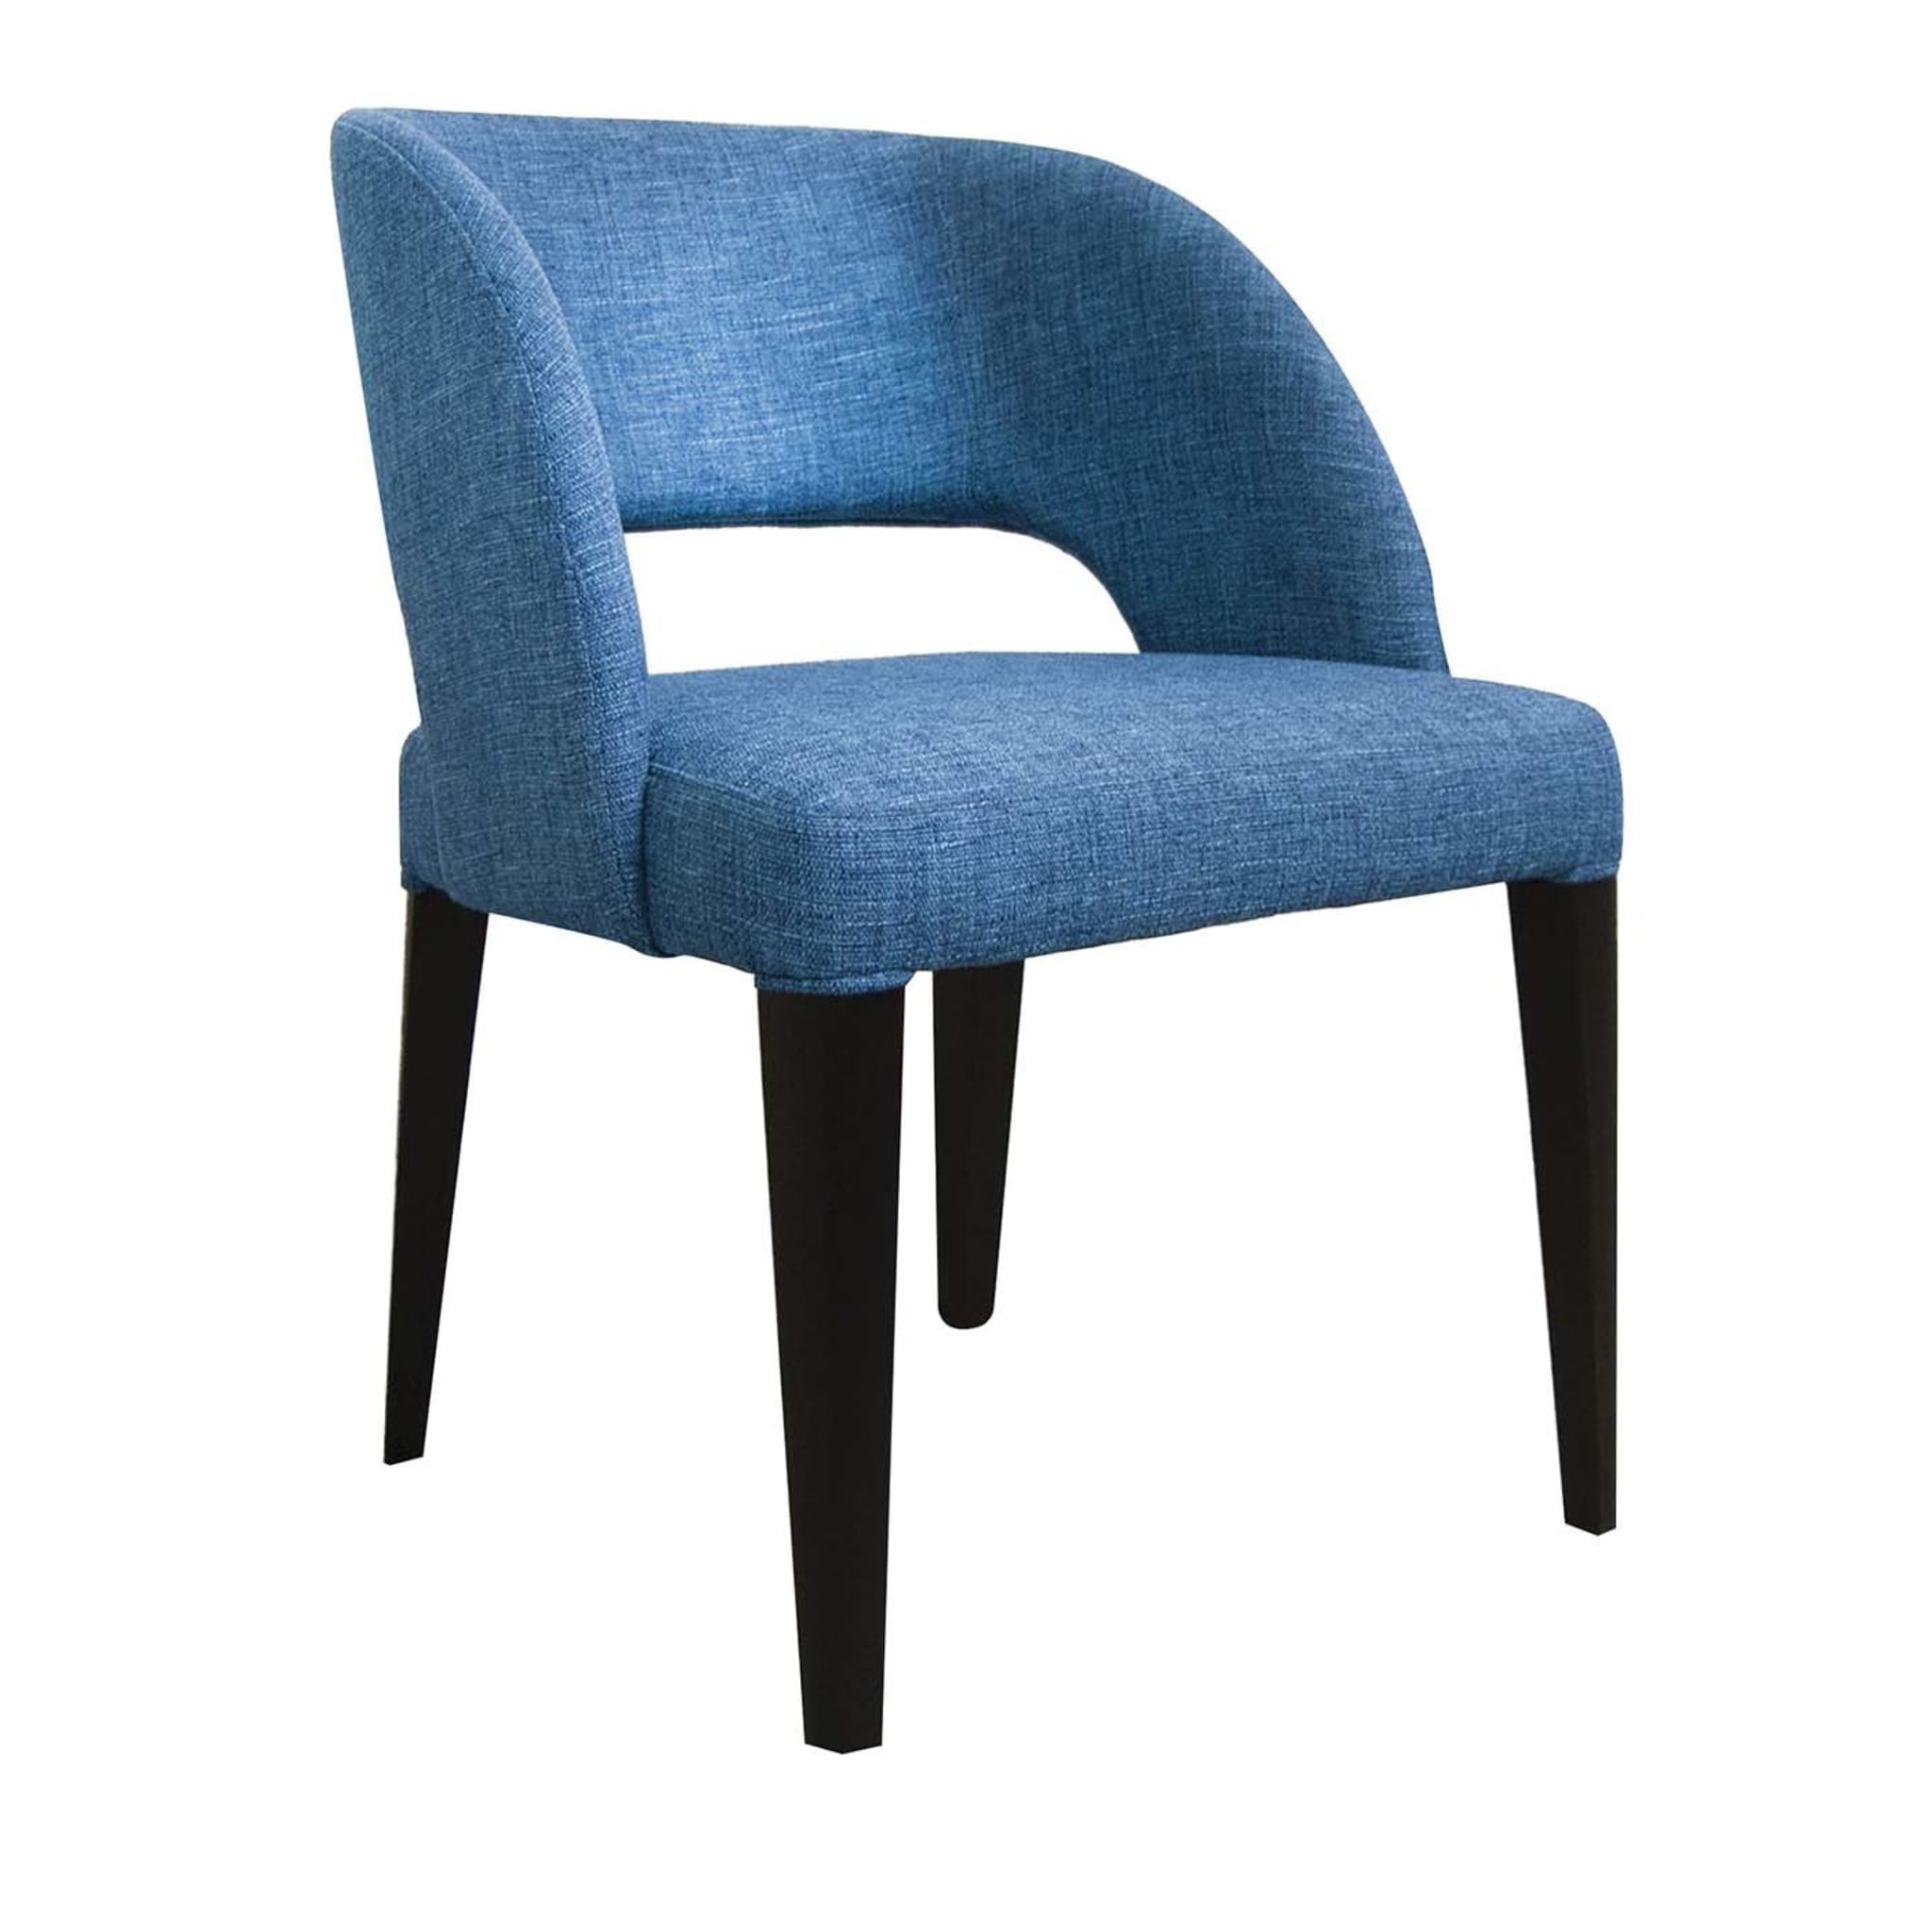 Set of 4 Bessy Cerulean Chairs - Main view